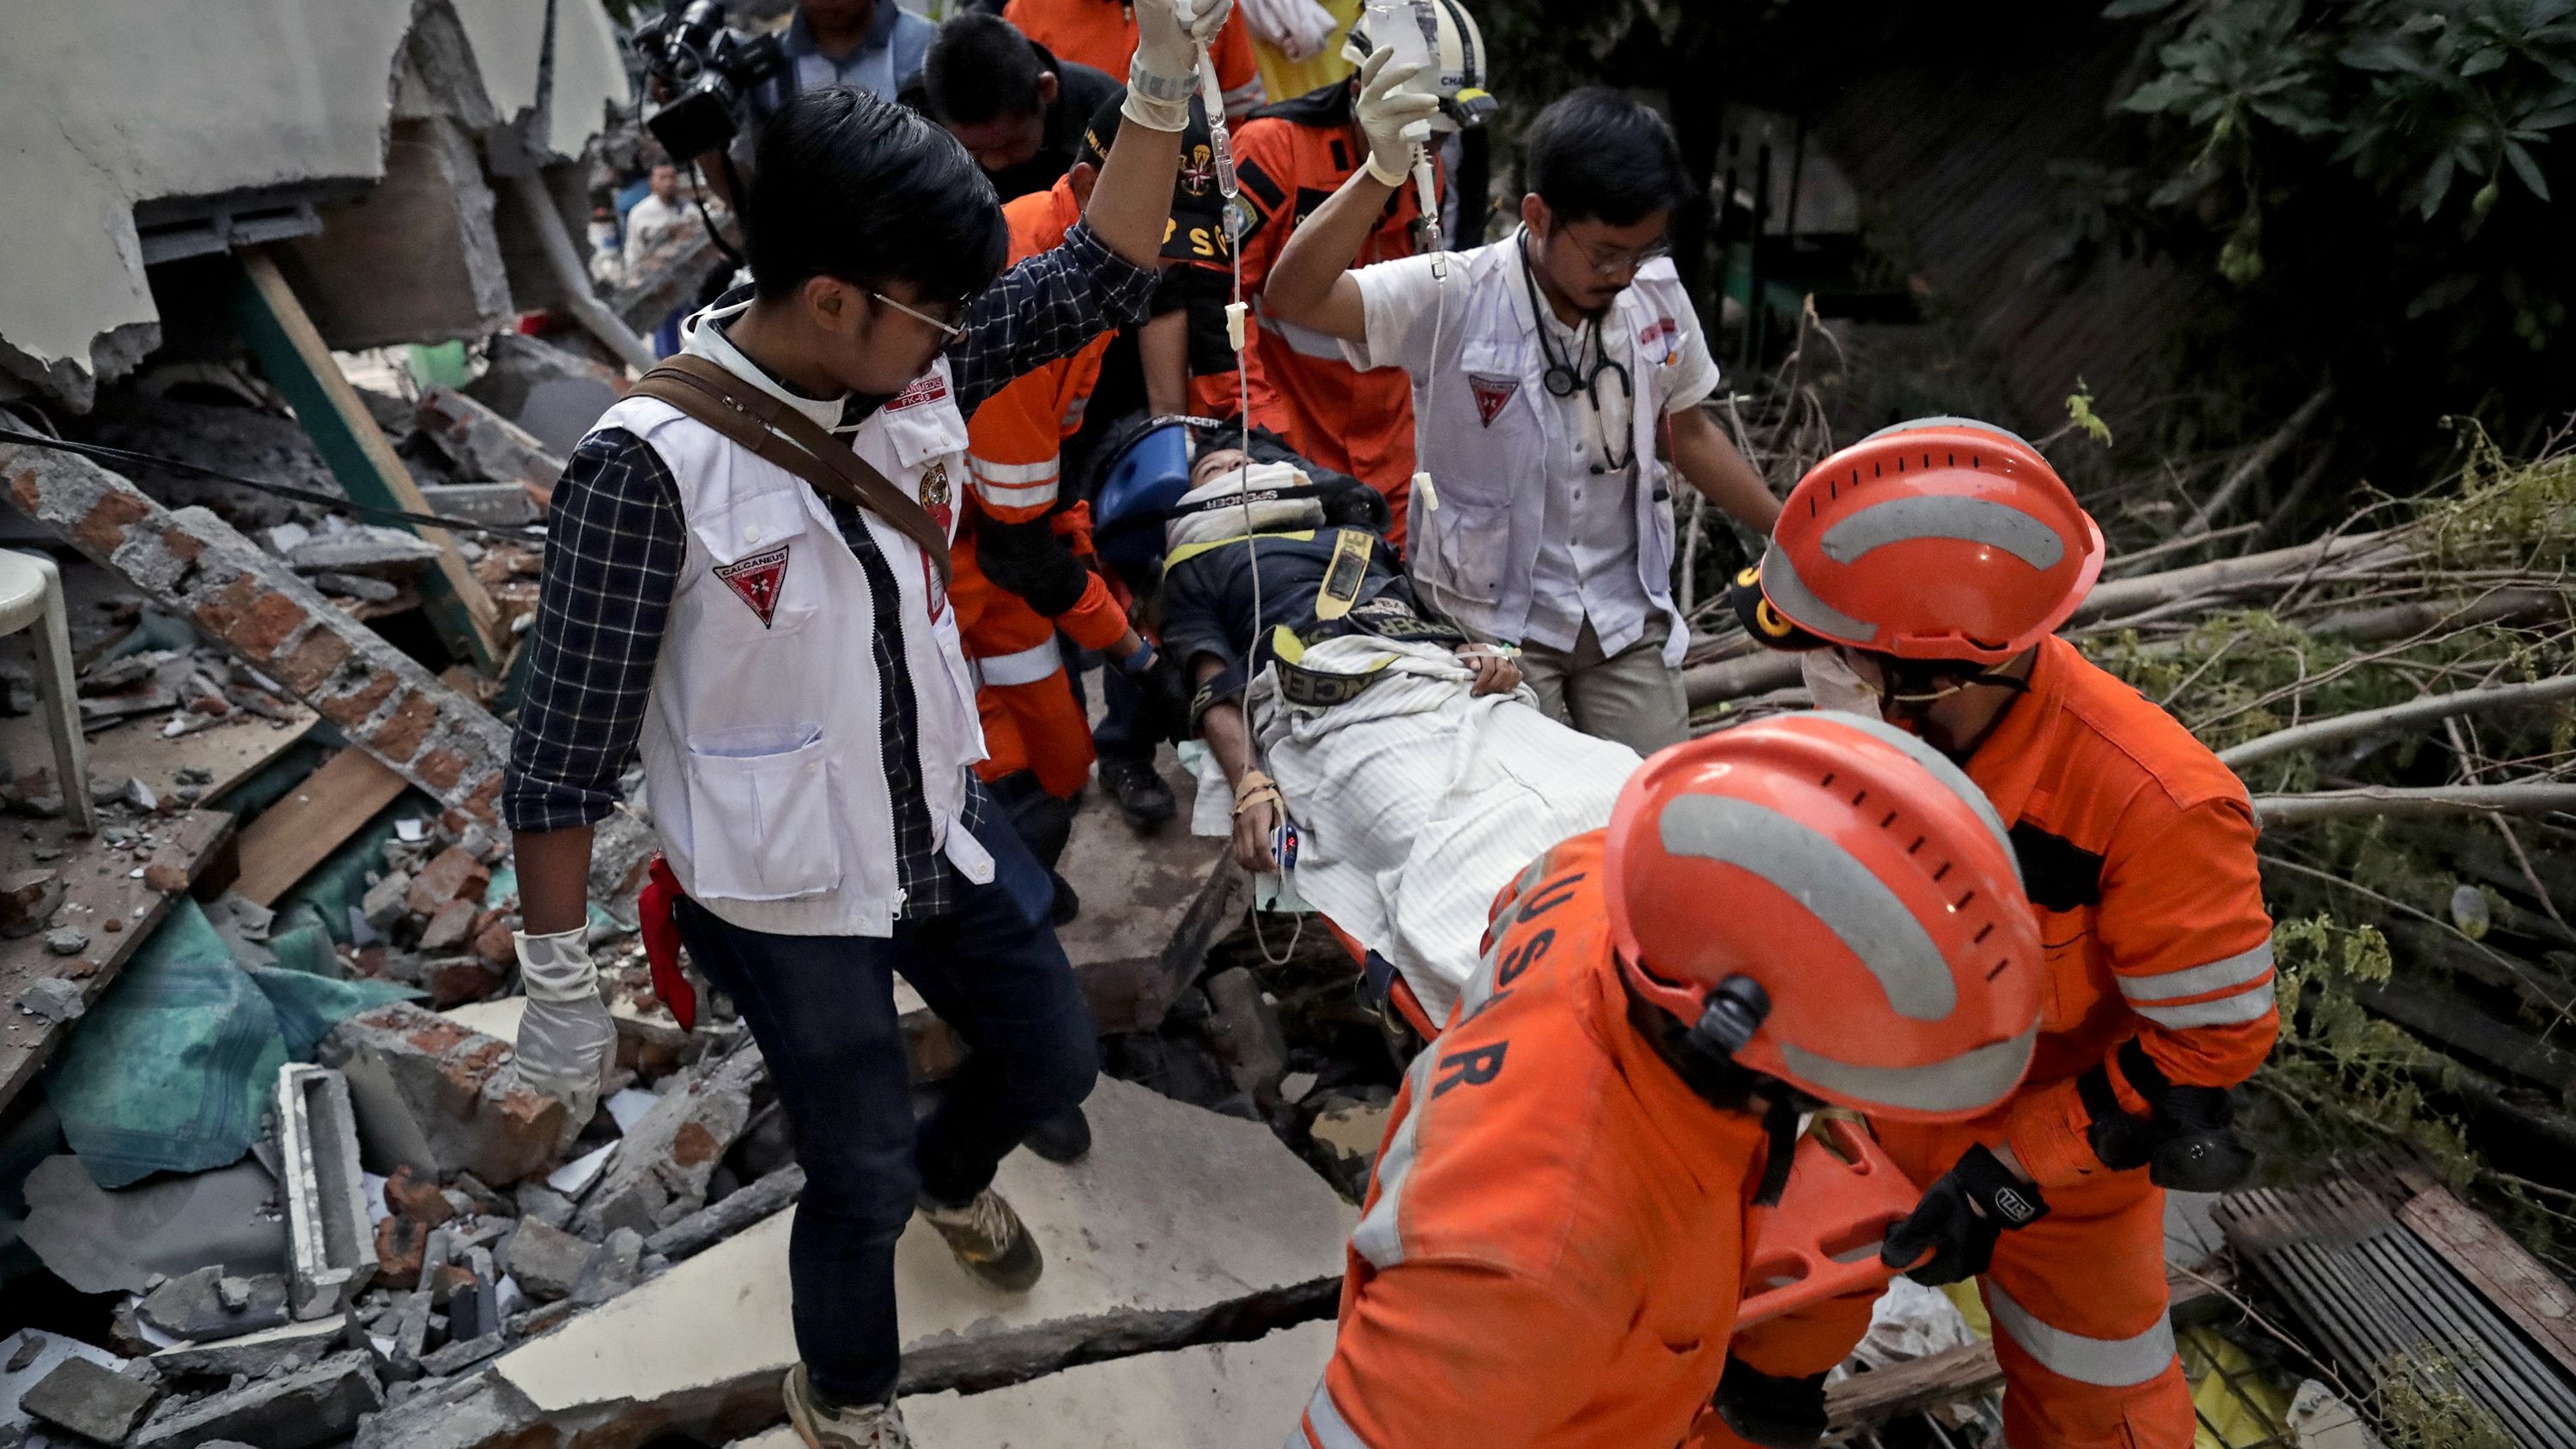 Rescuers move a survivor from a collapsed restaurant building in Palu.